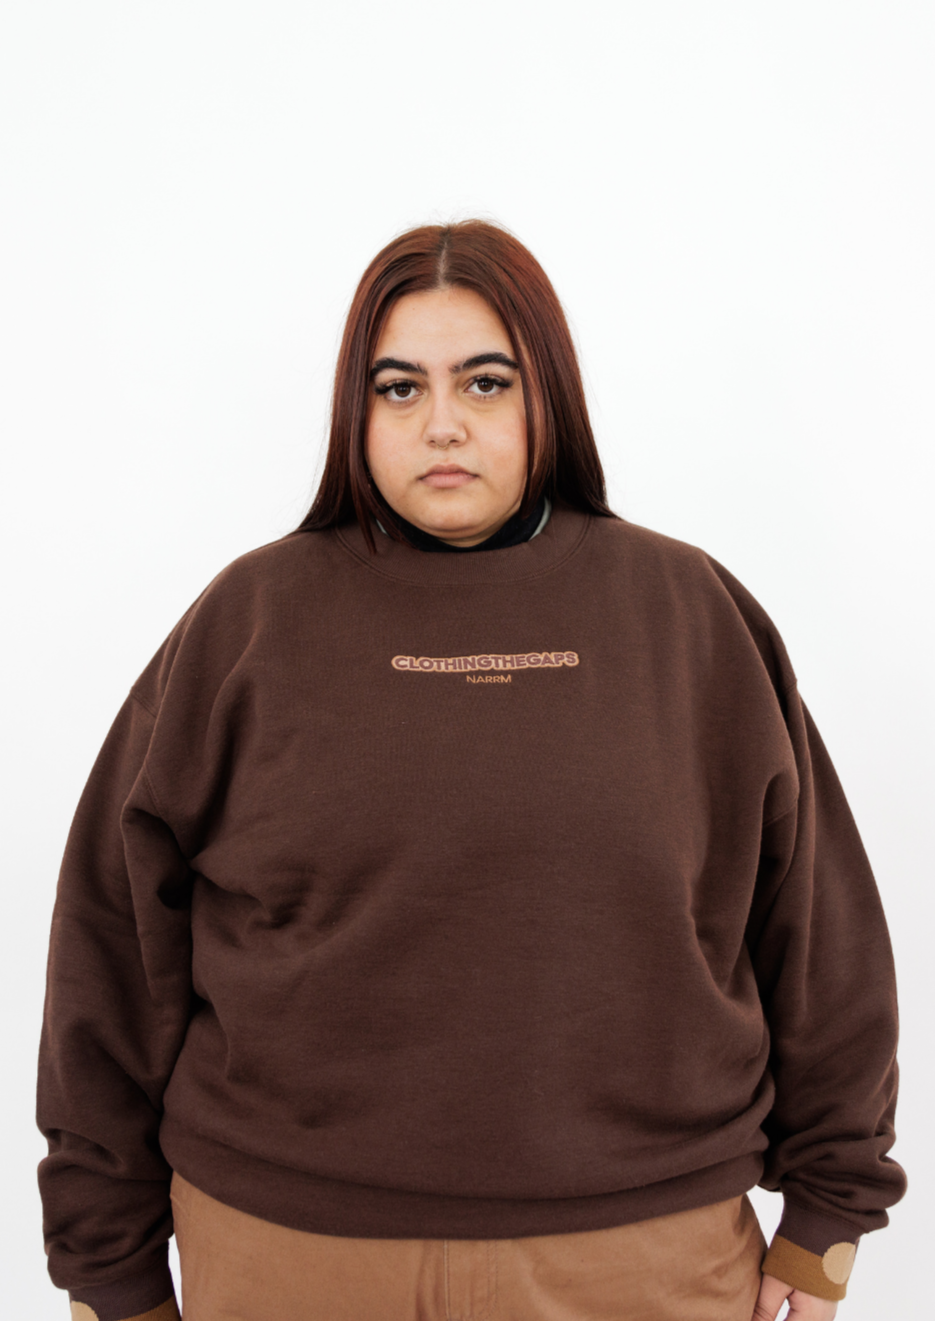 Clothing The Gaps. Chocolate Crew Jumper. Brown chocolate crew neck jumper. With tonal lighter brown 'Clothing the gaps' and the word 'Narrm' embroidered on the front of crewneck.' Wear your values' is also embroidered small on the back of the crew with the same light brown tonal colour. The wrist cuffs of the crew have a woven tonal brown aboriginal flag on them. 